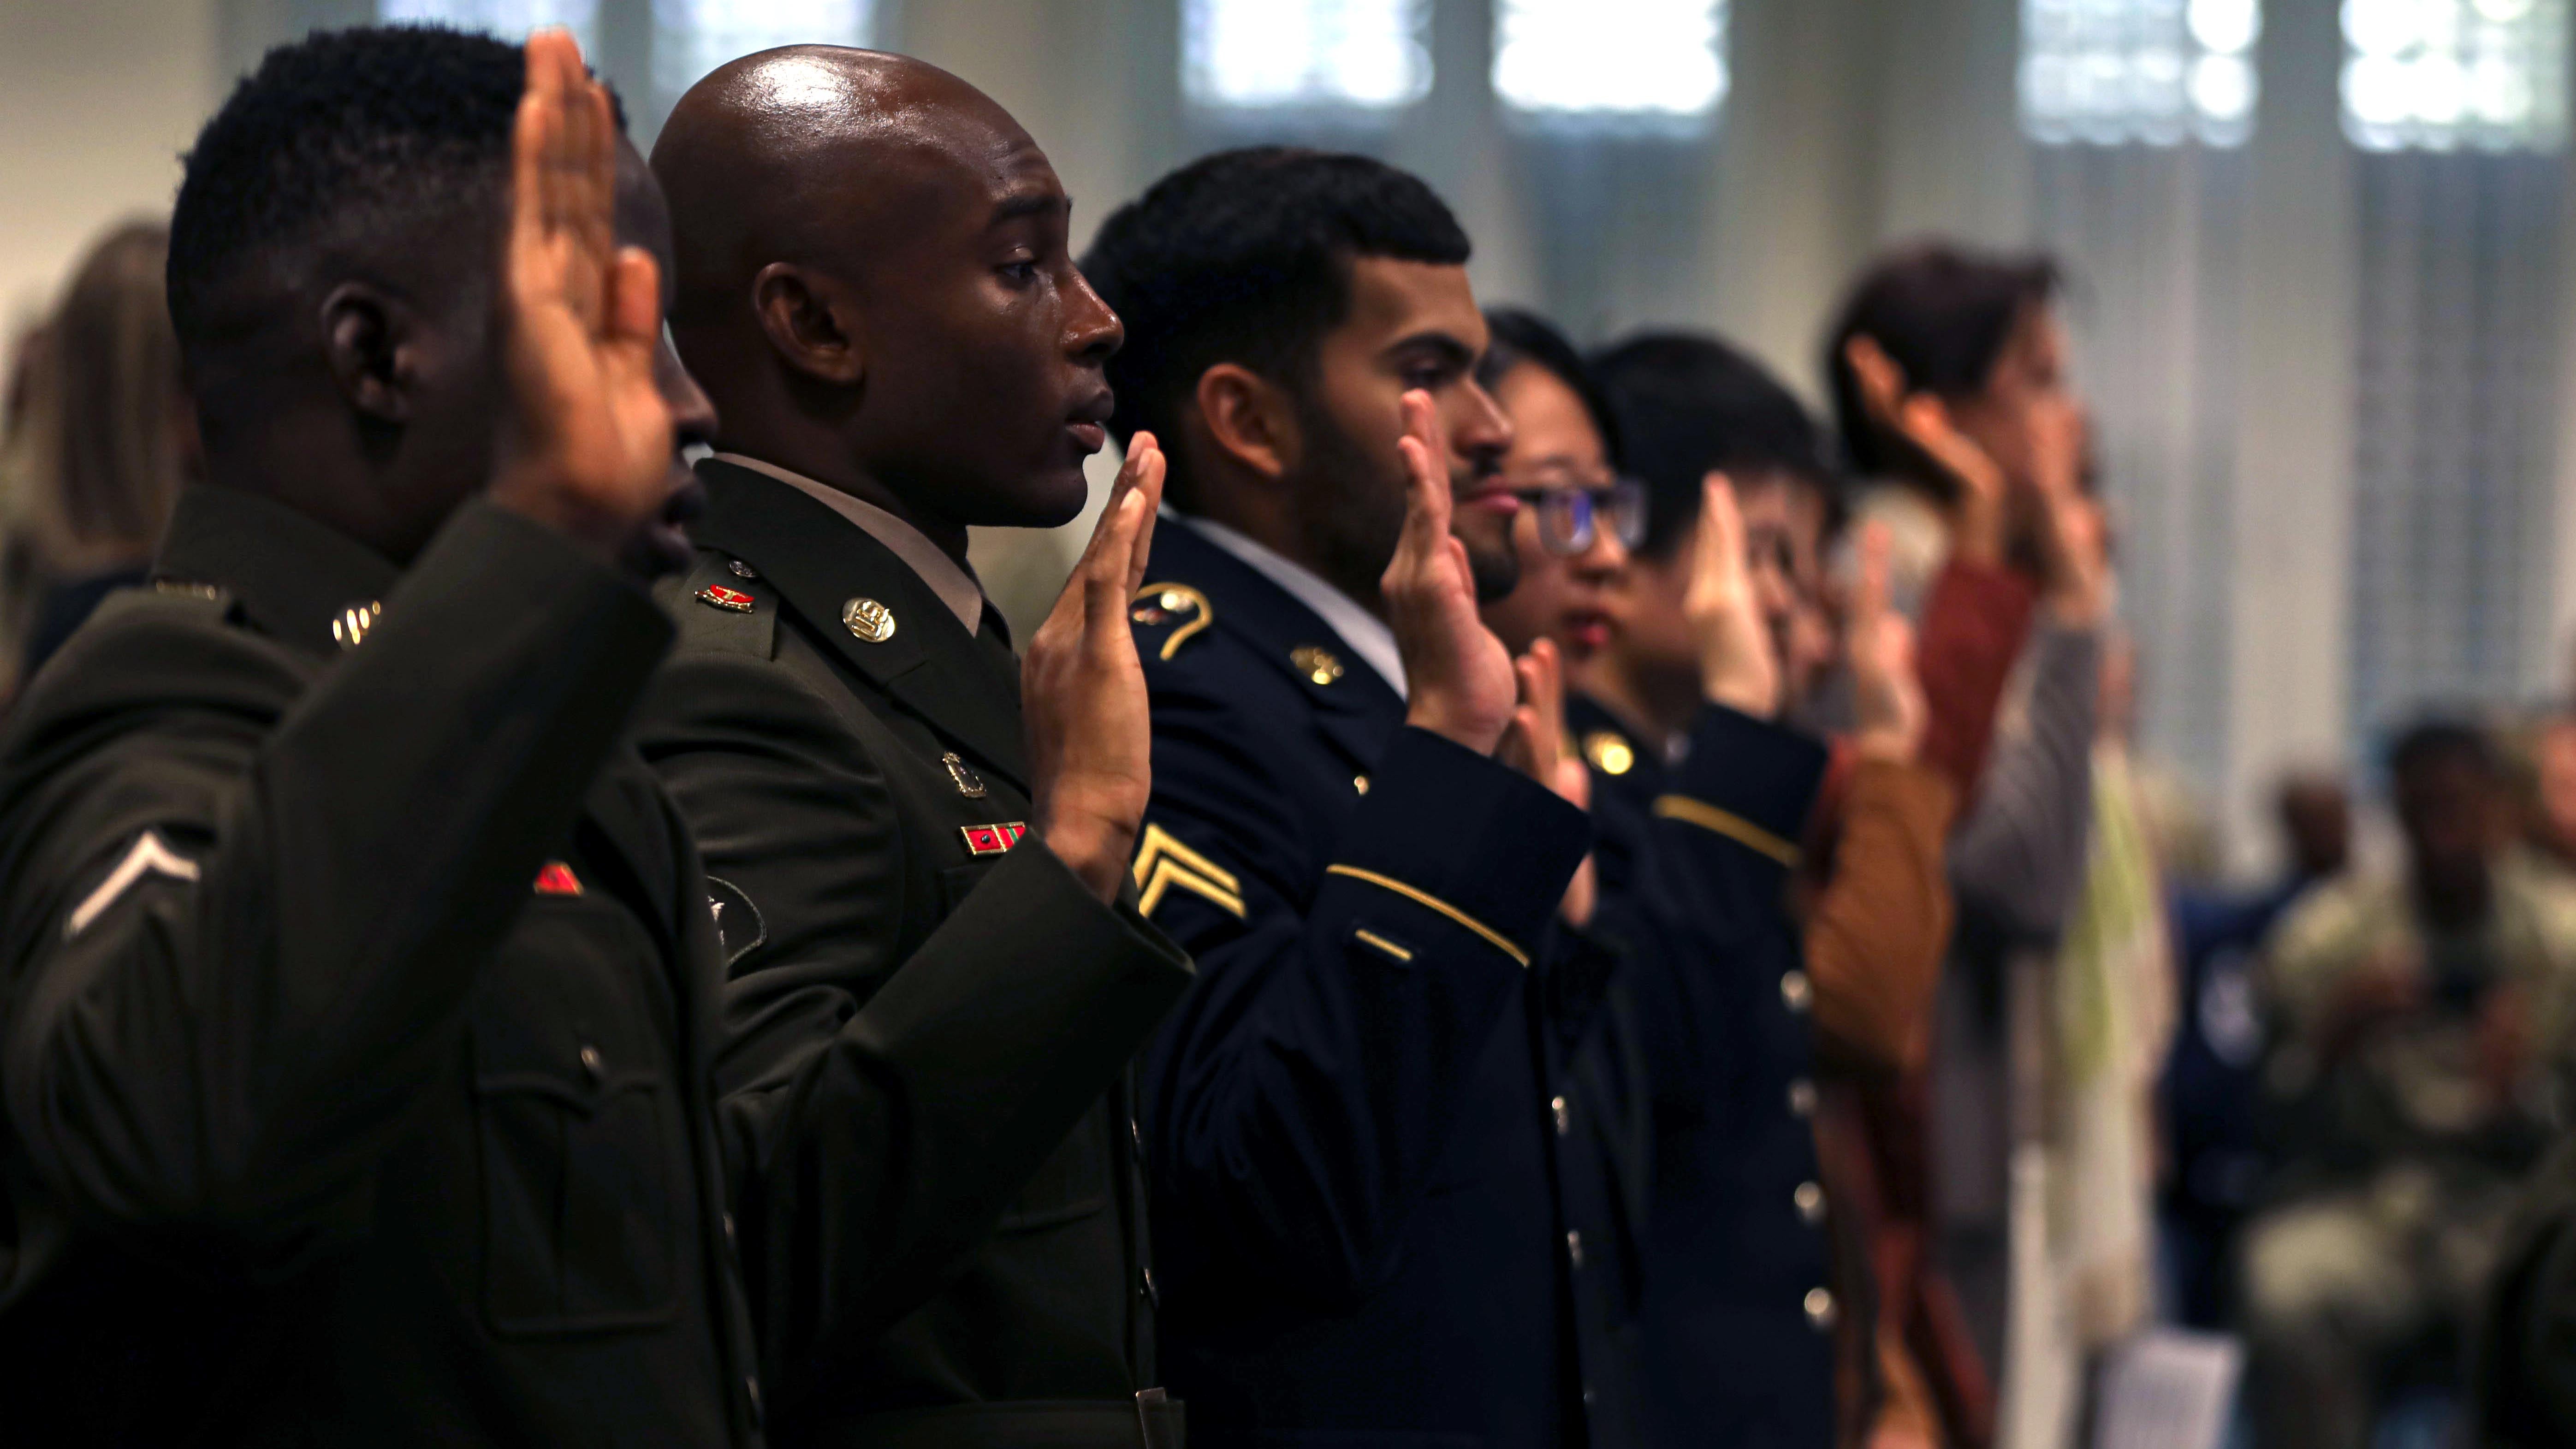 Soldiers taking oath of citizenship